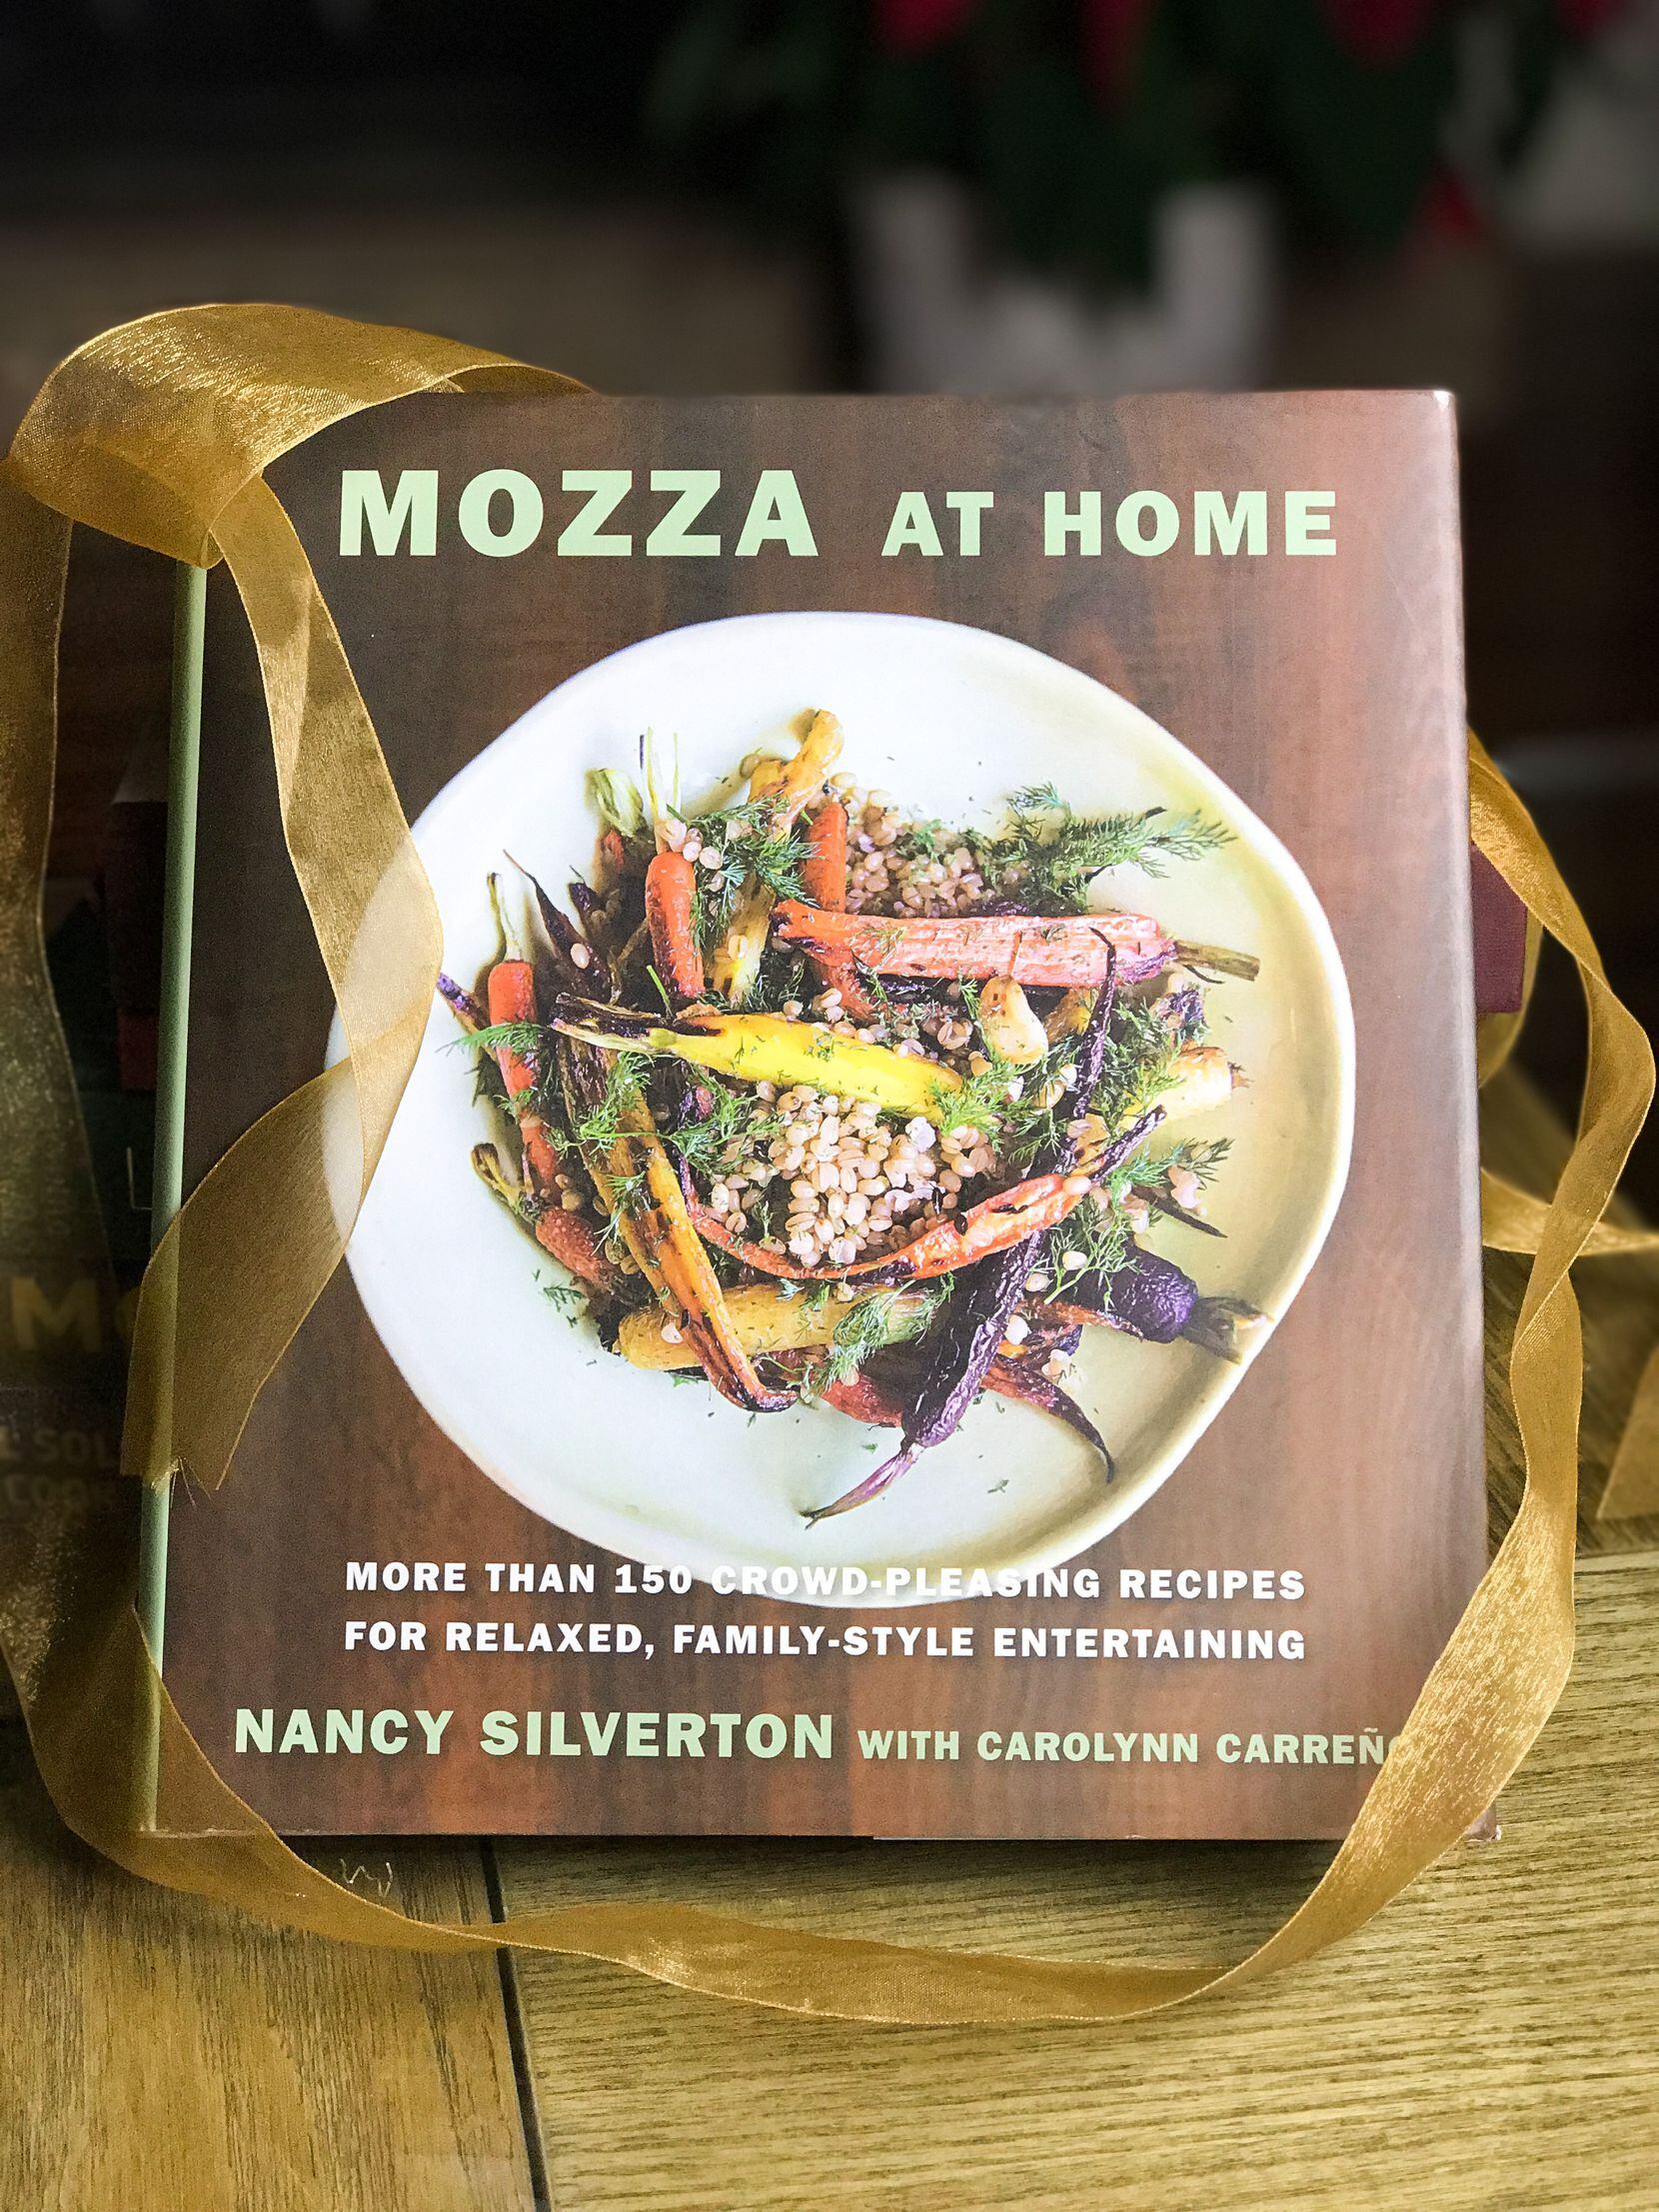 These 7 cookbooks make awesome holiday gifts for adventurous food-lovers